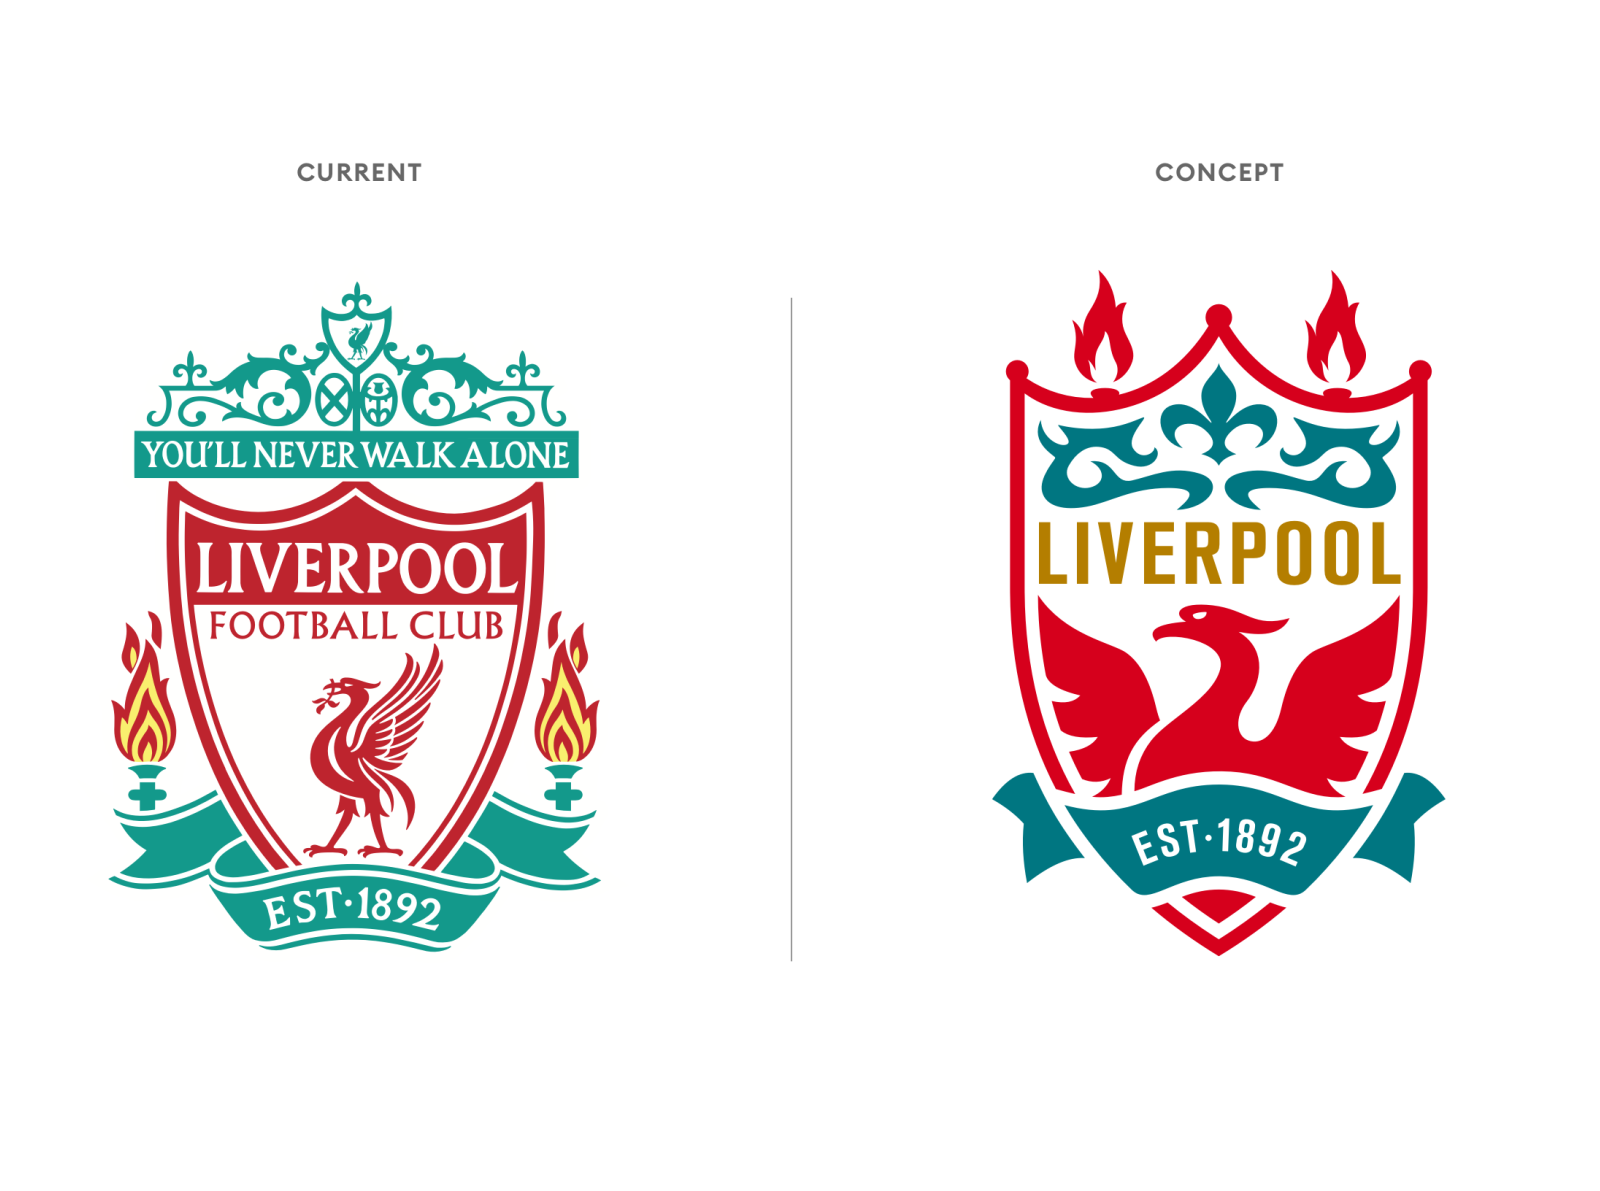 Liverpool FC Rebrand by Shixiong Du on Dribbble